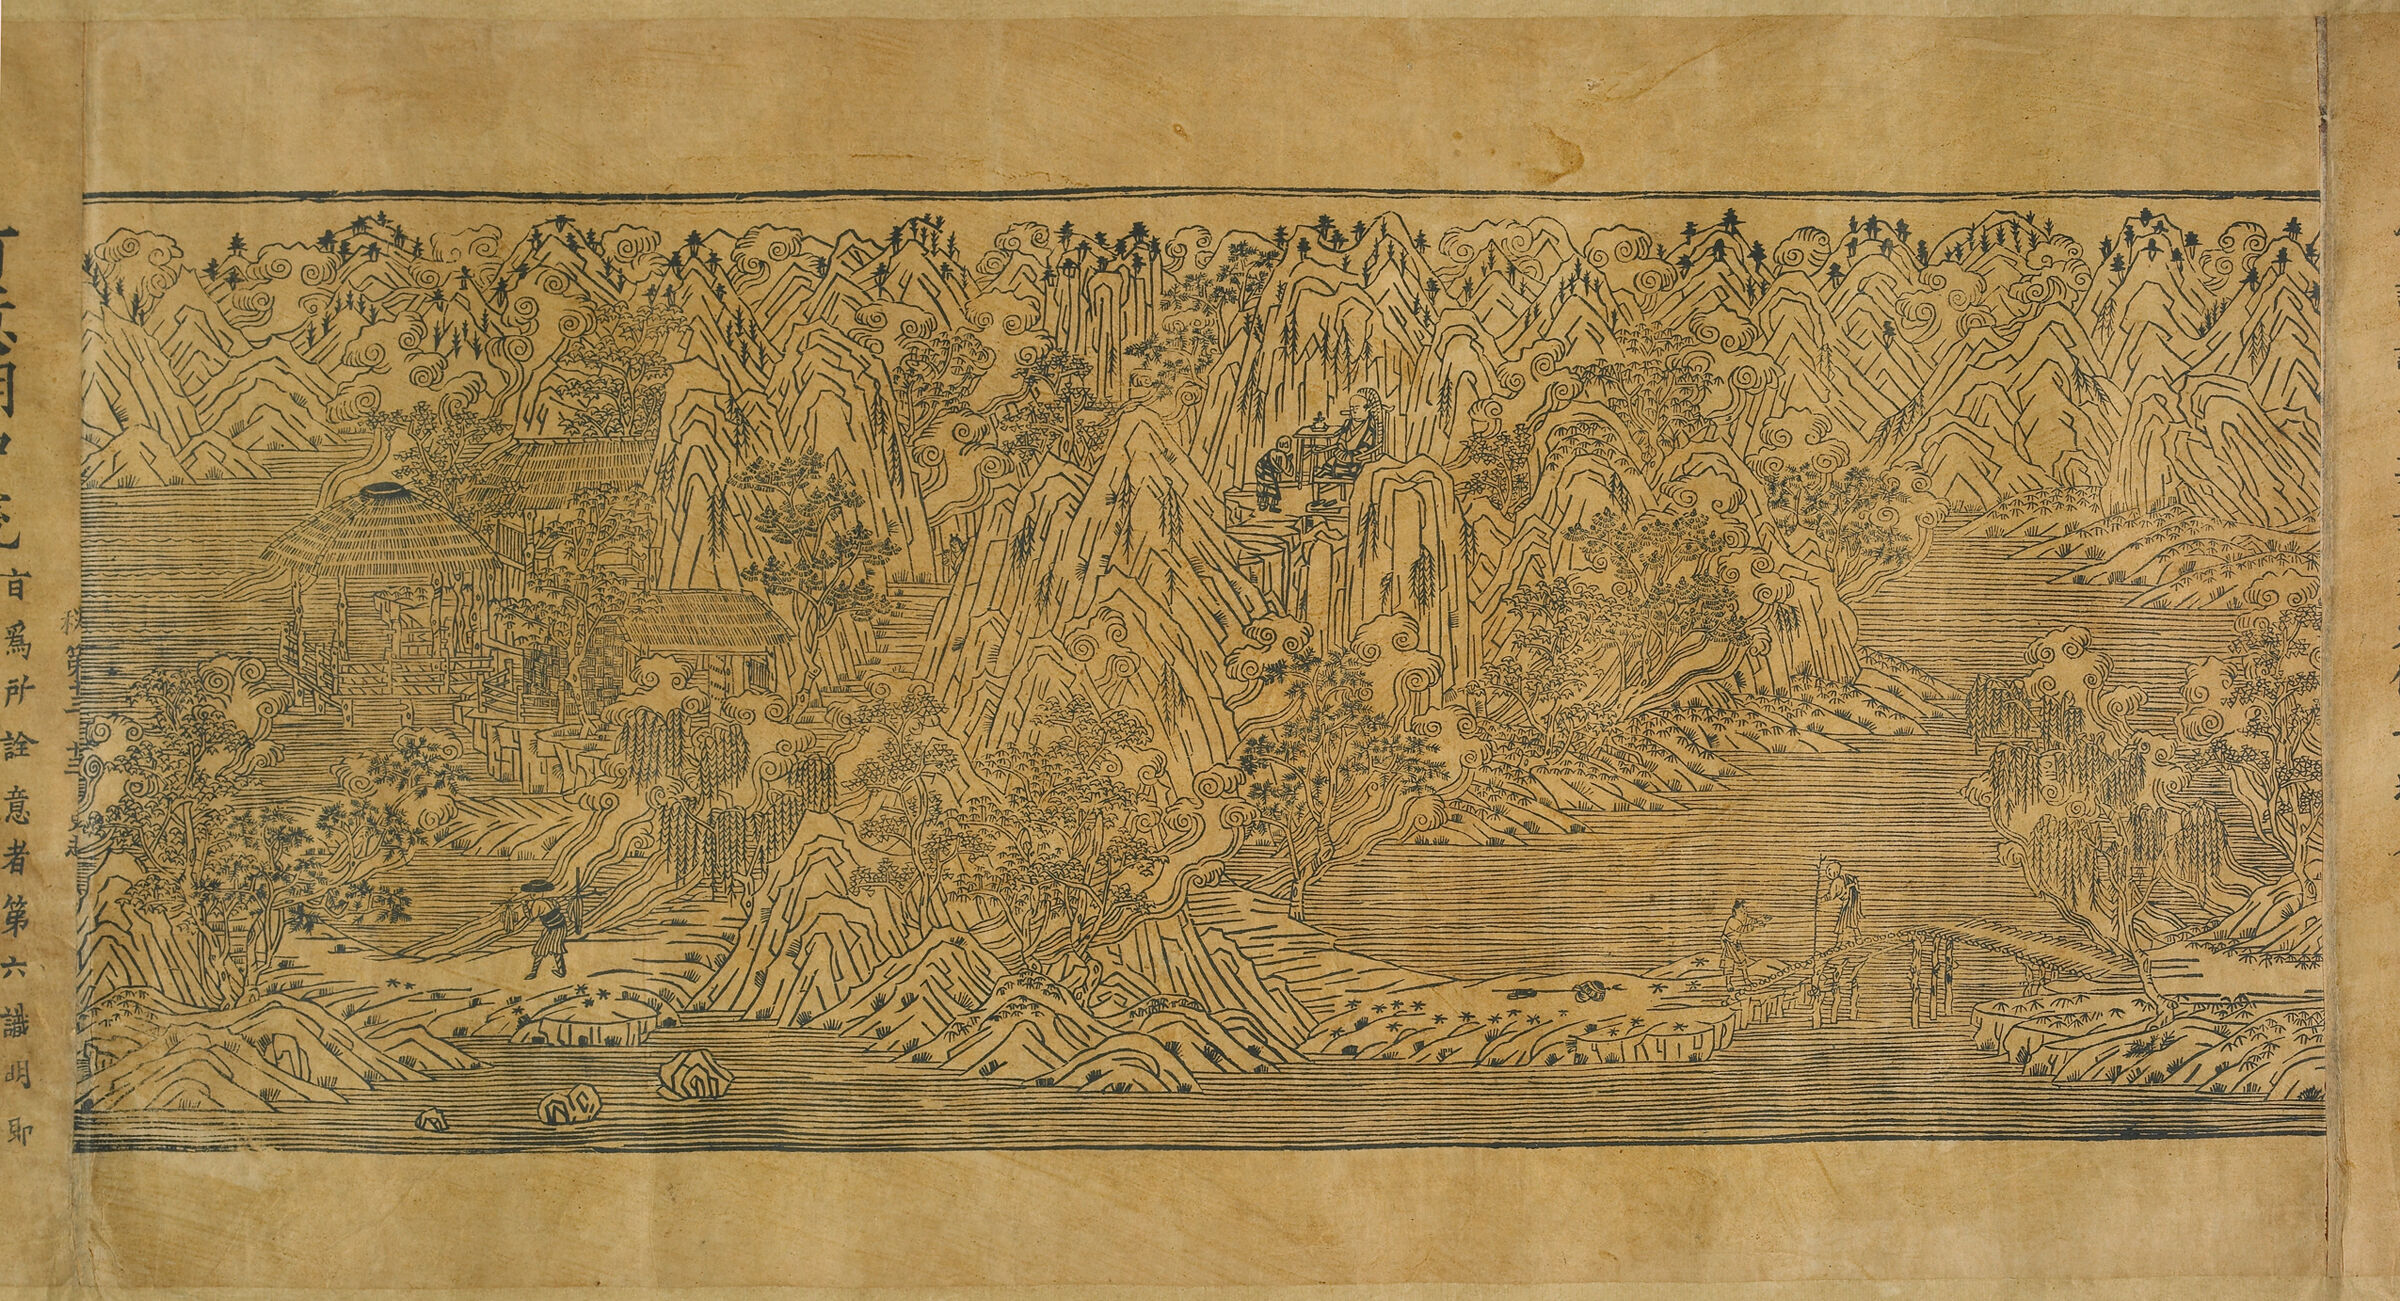 Landscape Illustration And Leaves 11 Through 15 From Chapter Thirteen Of The Imperial Commentary On The Buddhist Canon (Tripitaka) Commissioned By Emperor Taizong (R. 976-997)